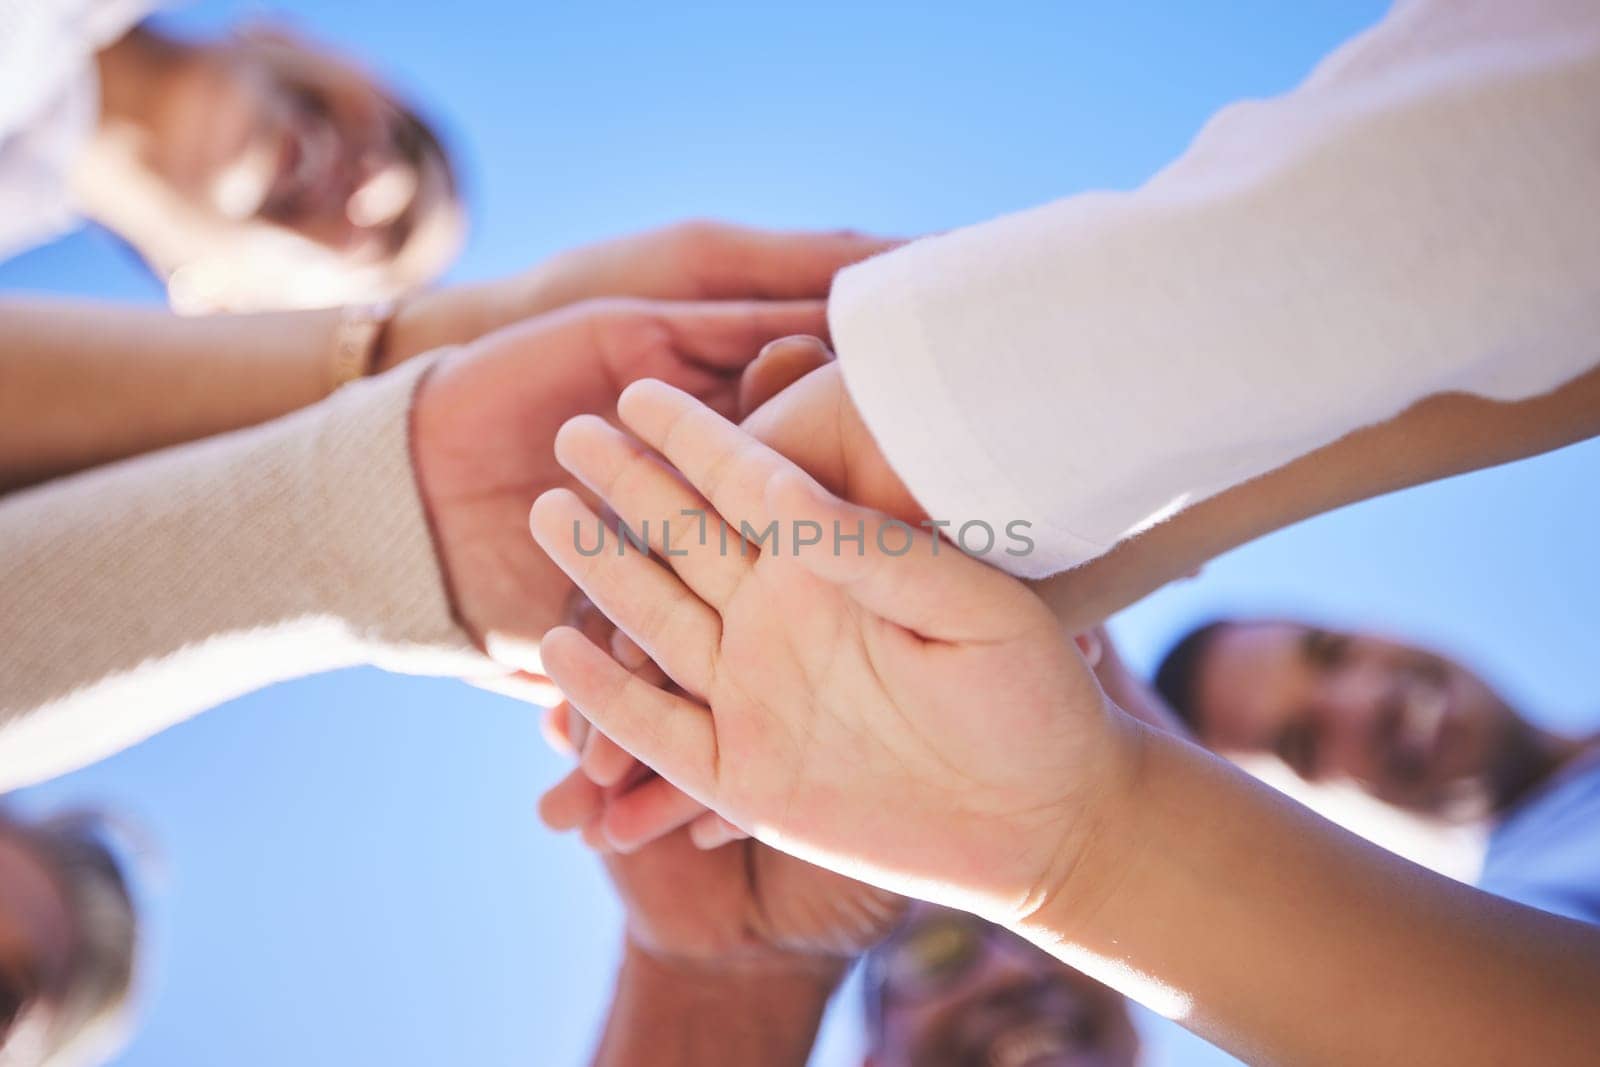 People, hands together and teamwork below in support for trust, bonding or unity and collaboration outdoors. Low angle of family or friends piling hand for team building, community or goals outside.